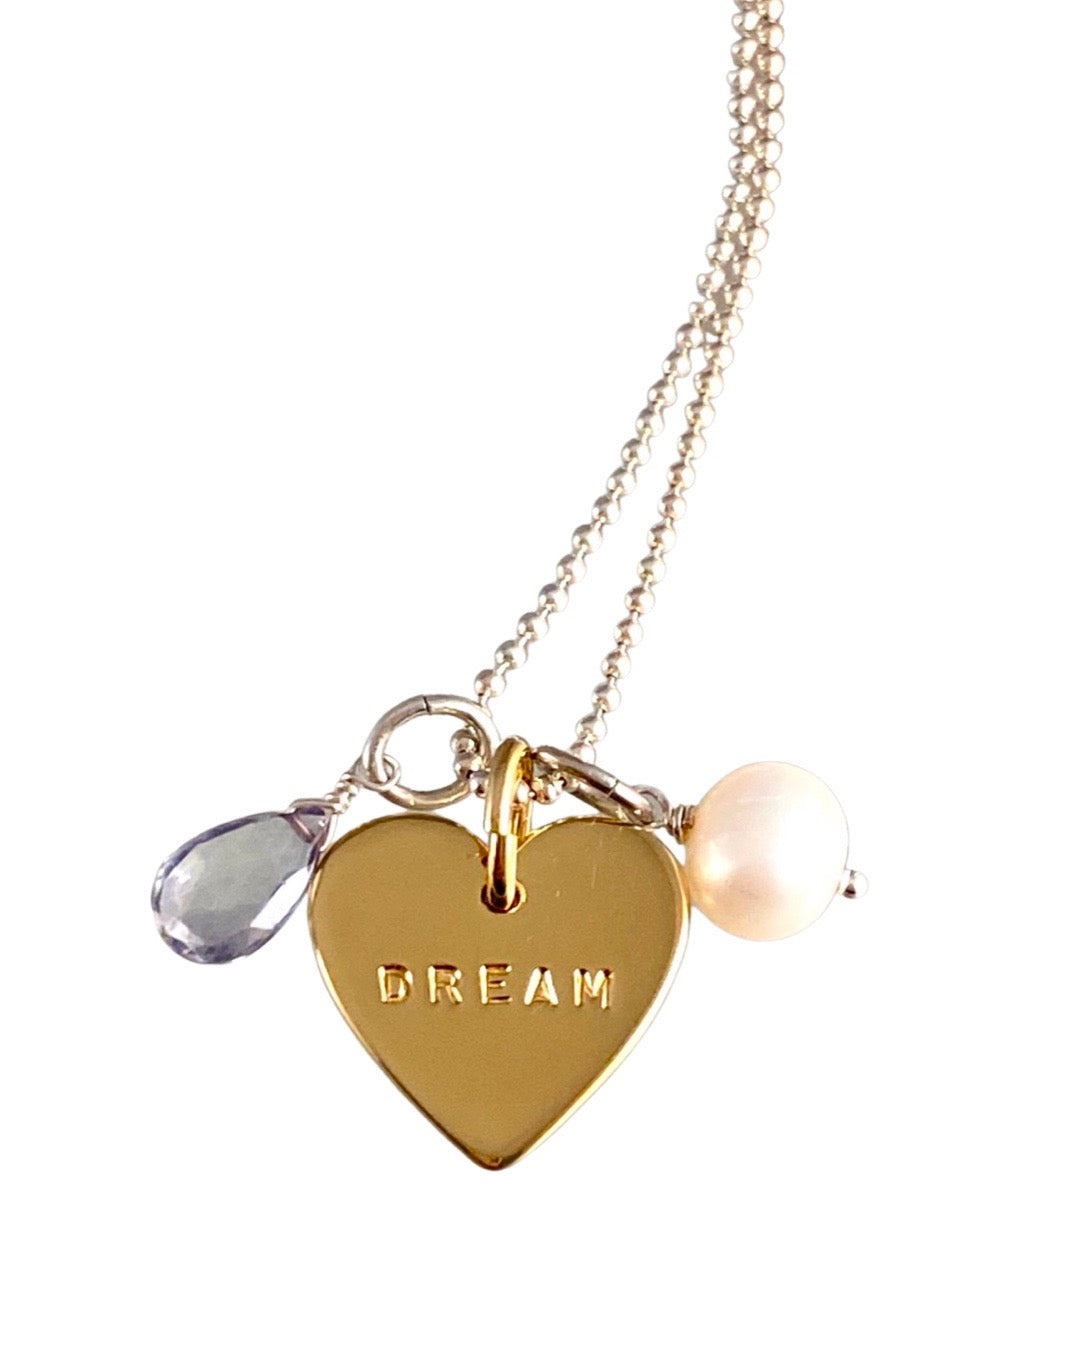 Yellow Gold Vermeil Heart Charm Necklace